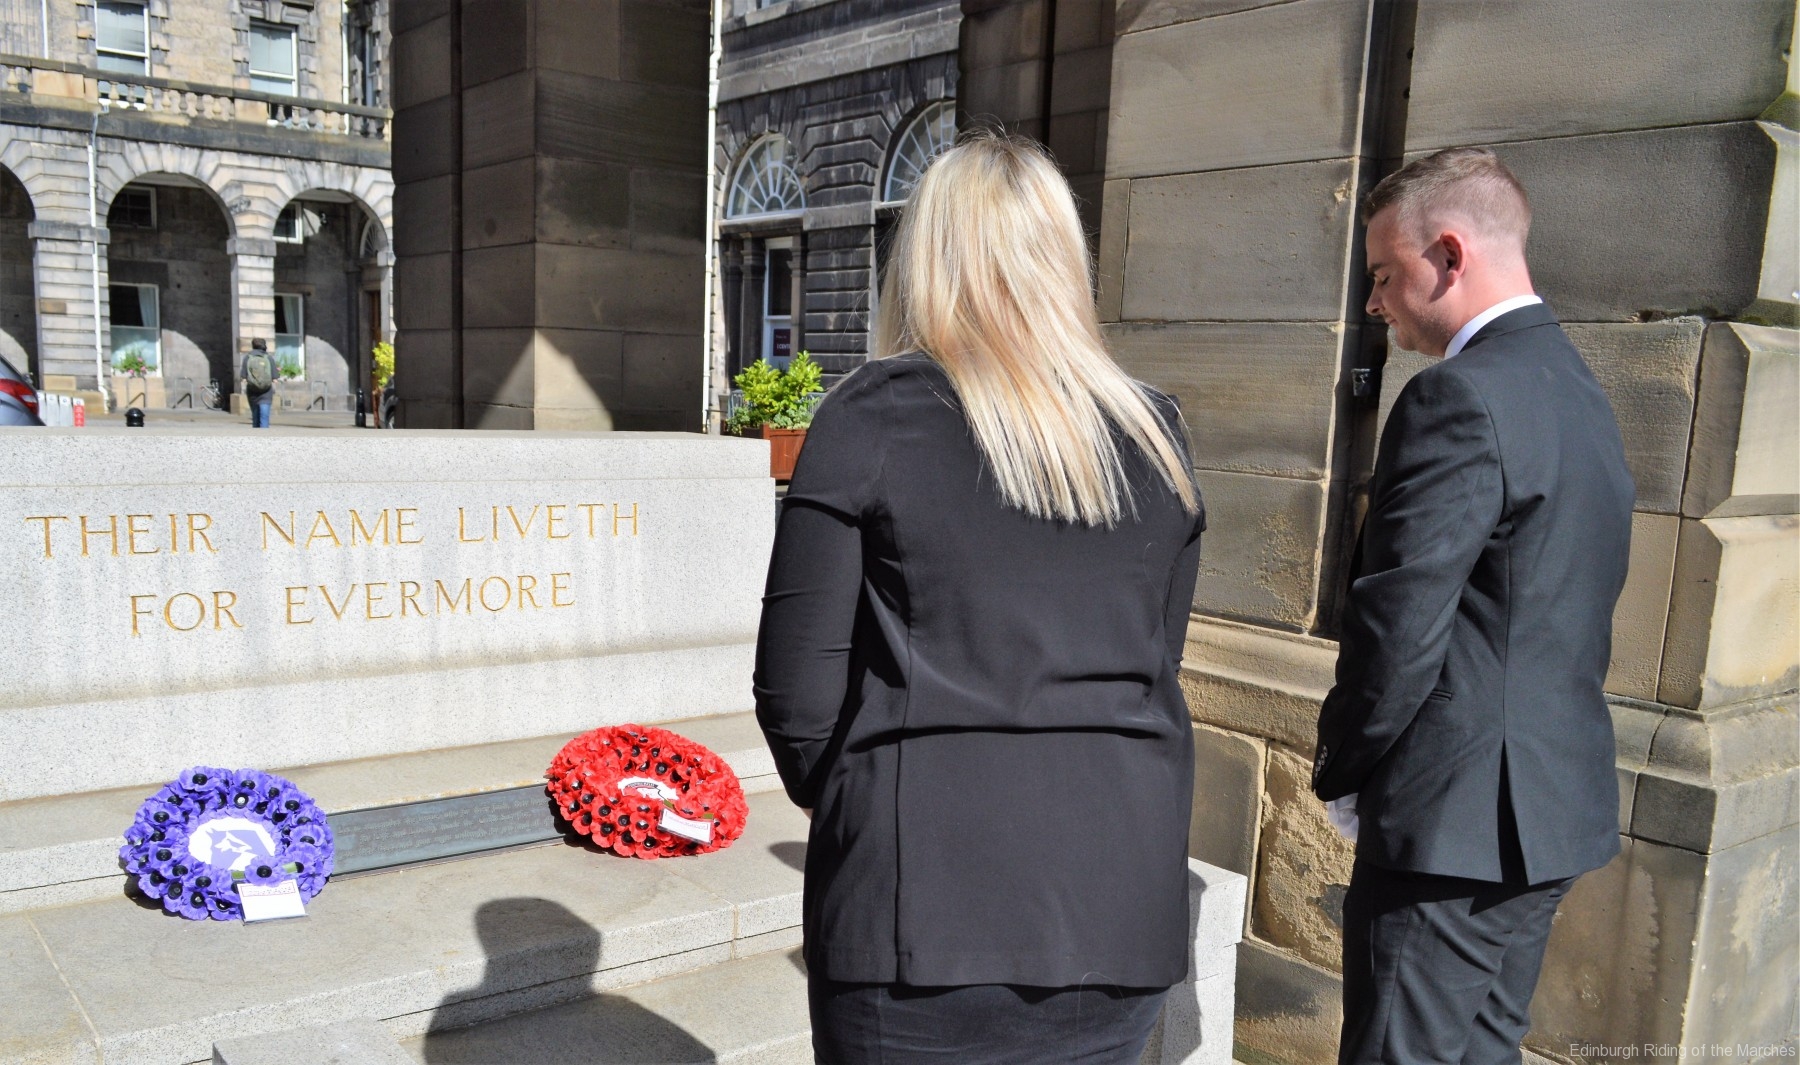 2021 Captain and Lass Elect, Jay Sturgeon and Abbie McDowall lay a wreath at the City Chambers War Memorial